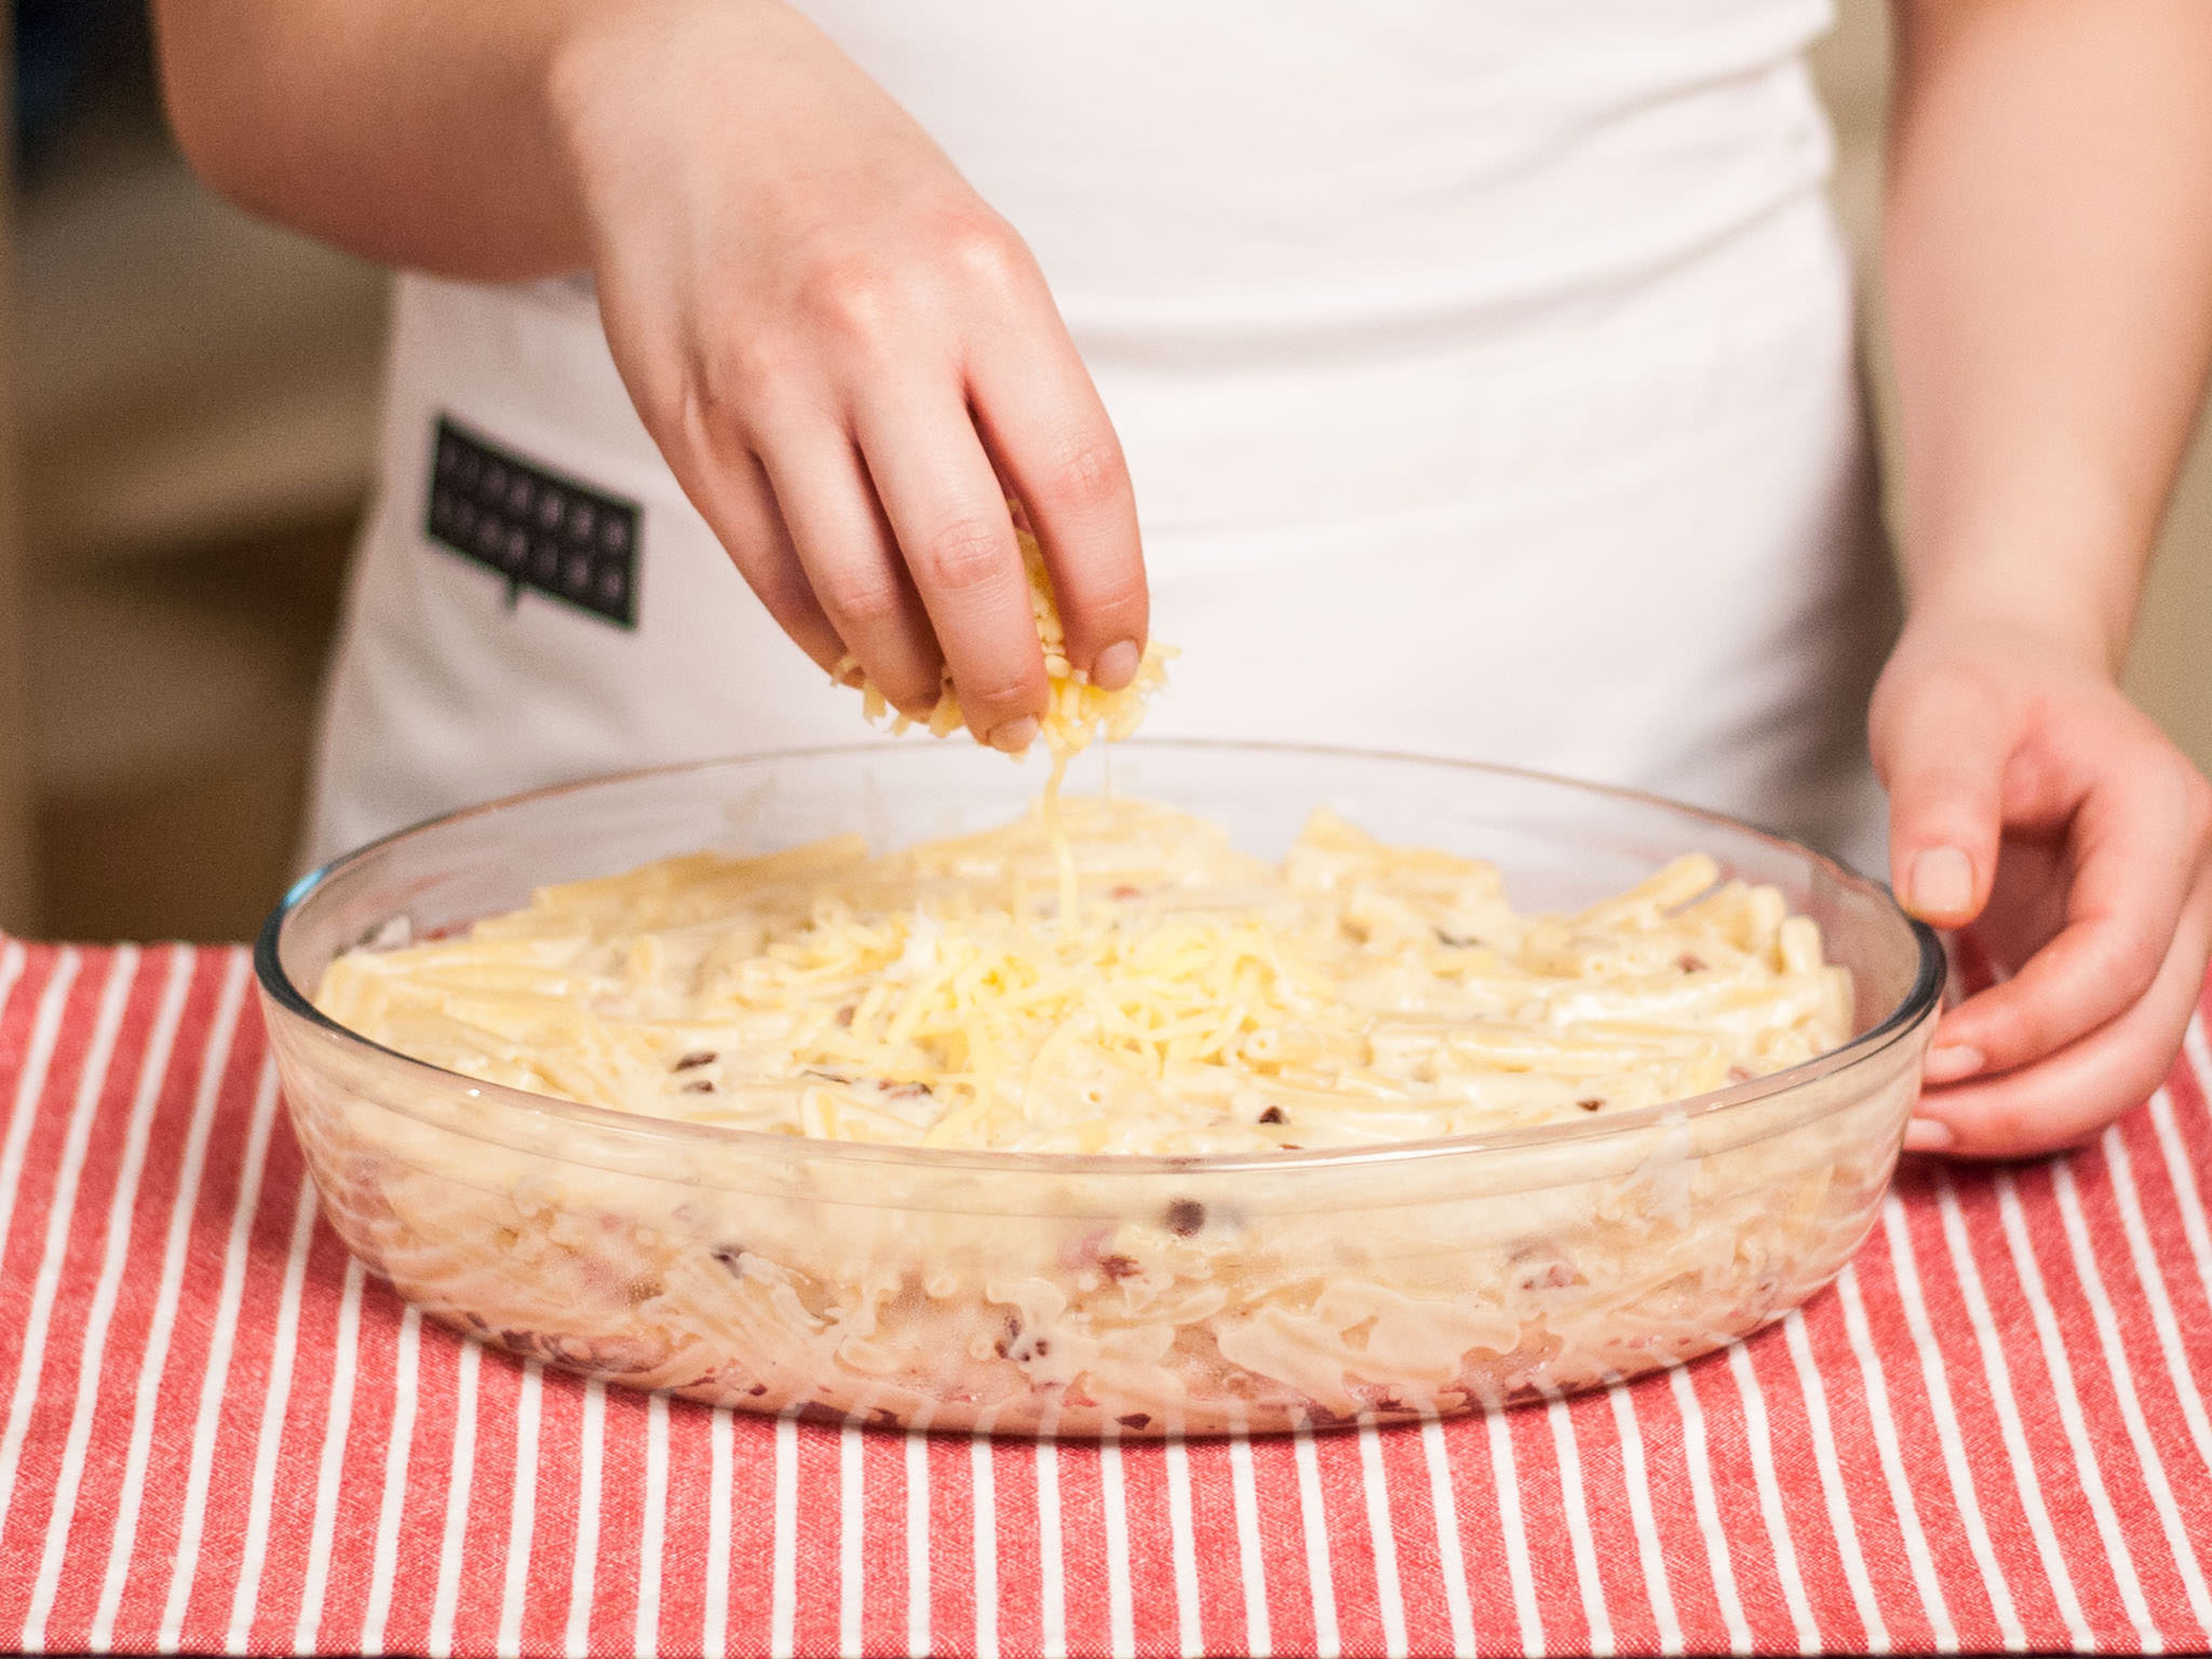 Add precooked pasta to the cheese sauce and mix briefly. Pour everything into a greased baking dish, sprinkle with the remaining cheese and bake in preheated oven at 180°C/ 355°F. for approx. 30 – 35 min. until golden.